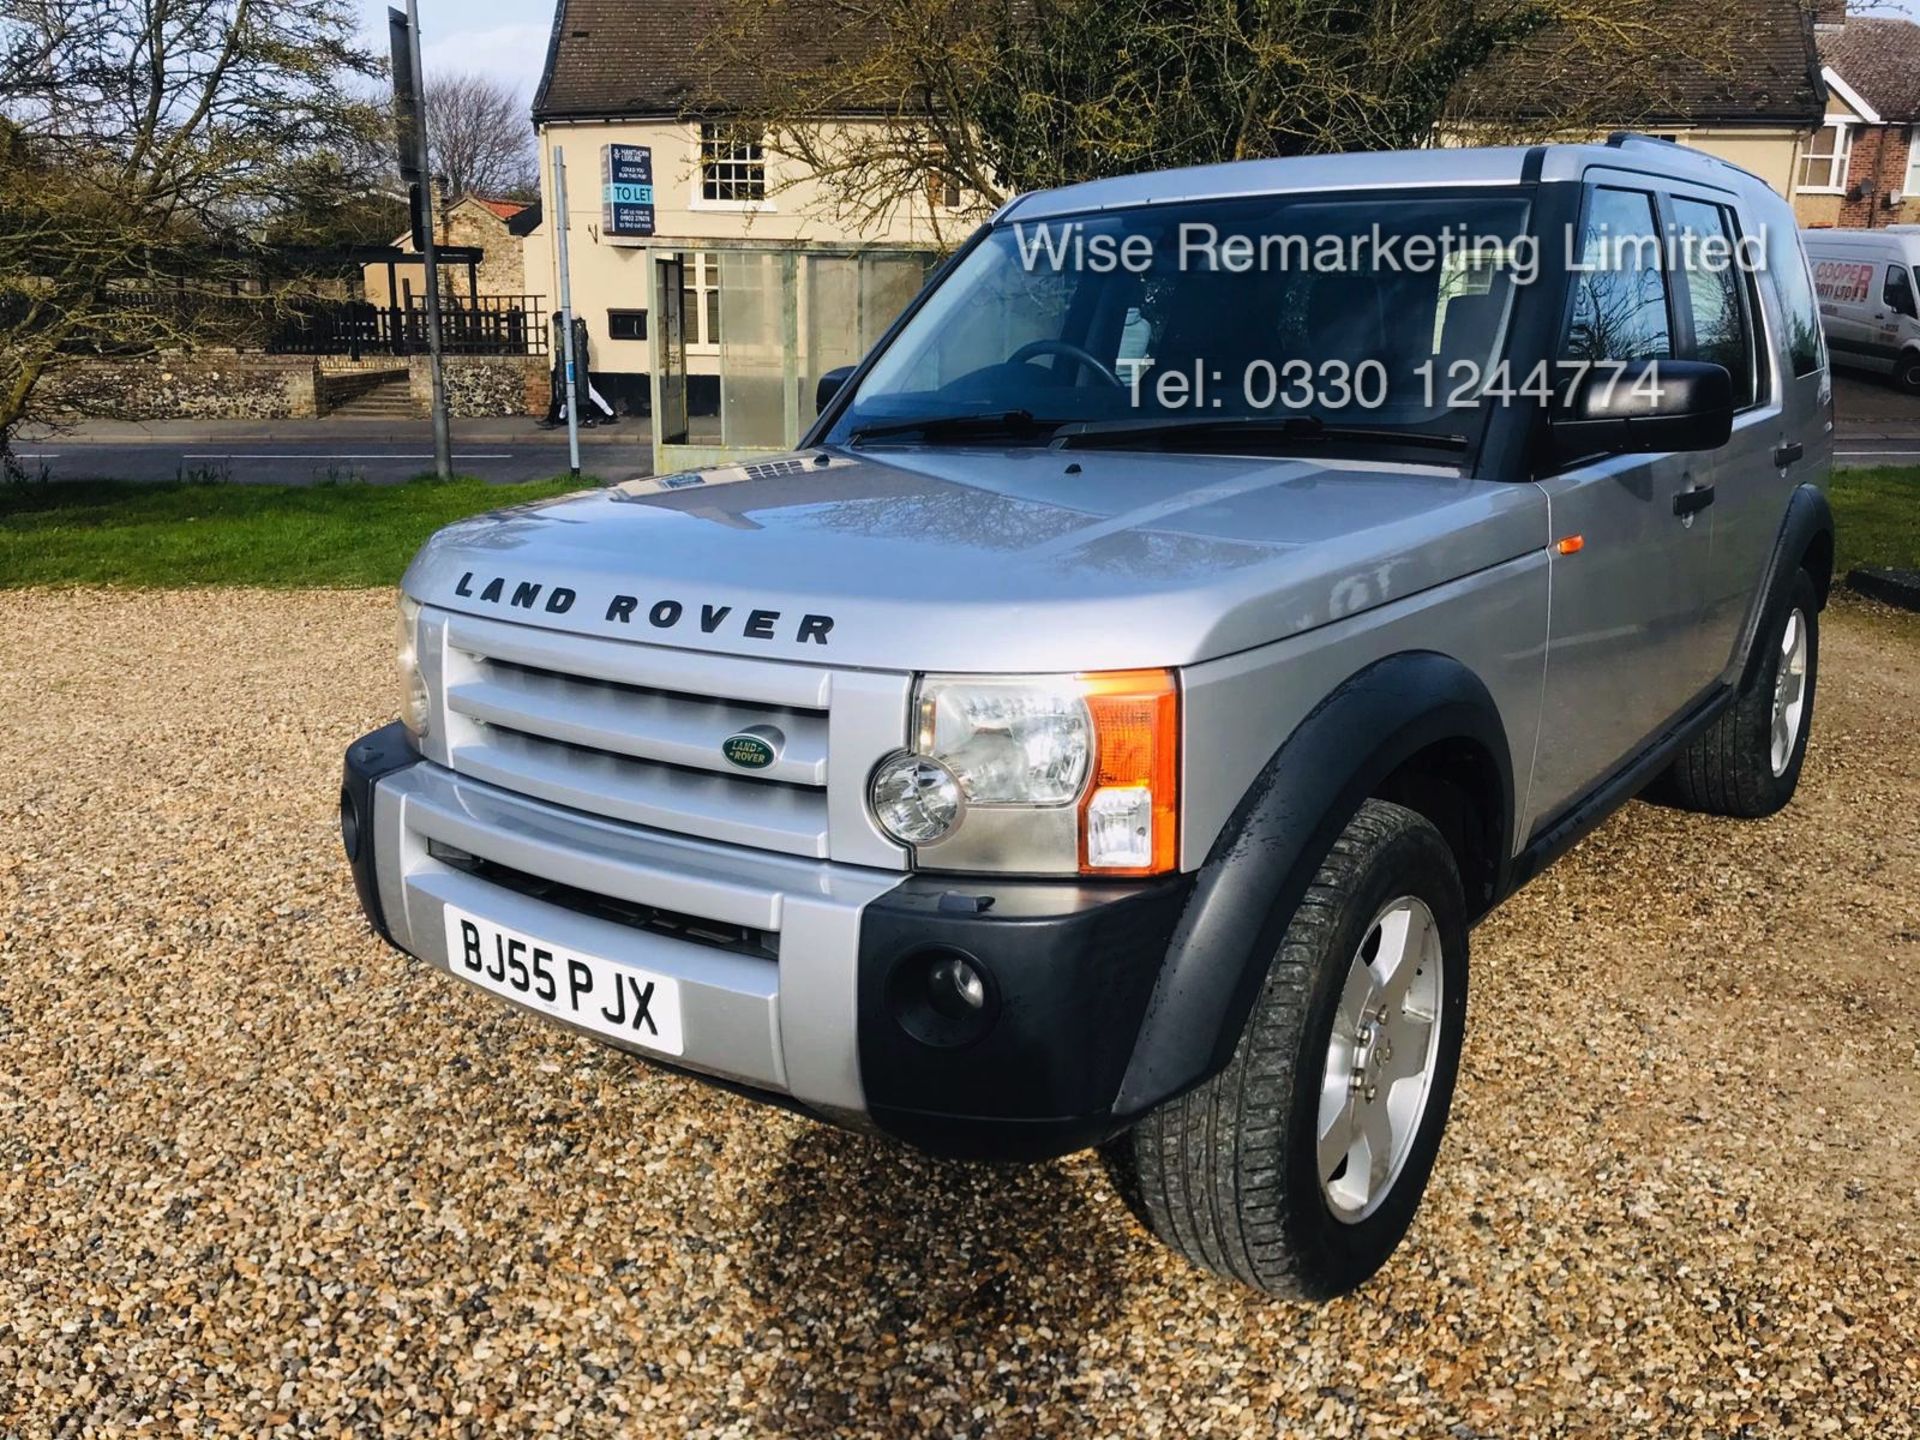 Land Rover Discovery 3 2.7 TDV6 S - 2006 Model - Service History - Heated Seats - Tow Bar - 7 seats - Image 3 of 21